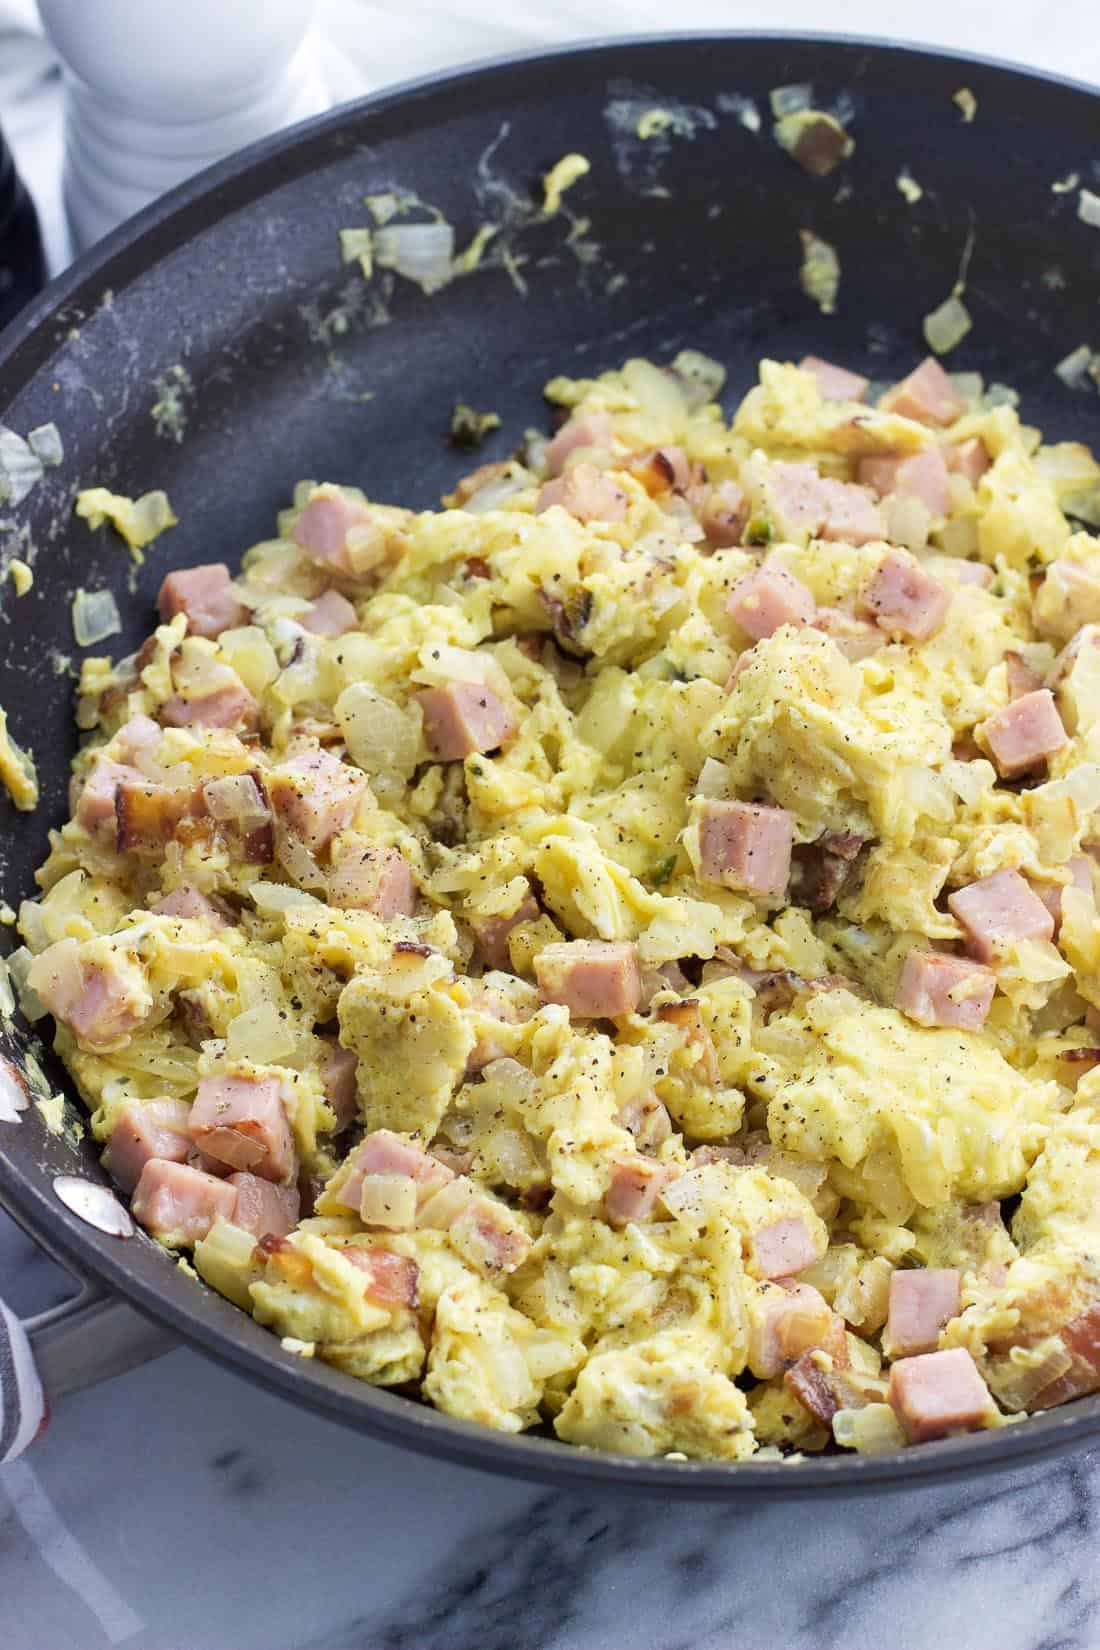 Scrambled eggs, onion, and cubed ham in a skillet.